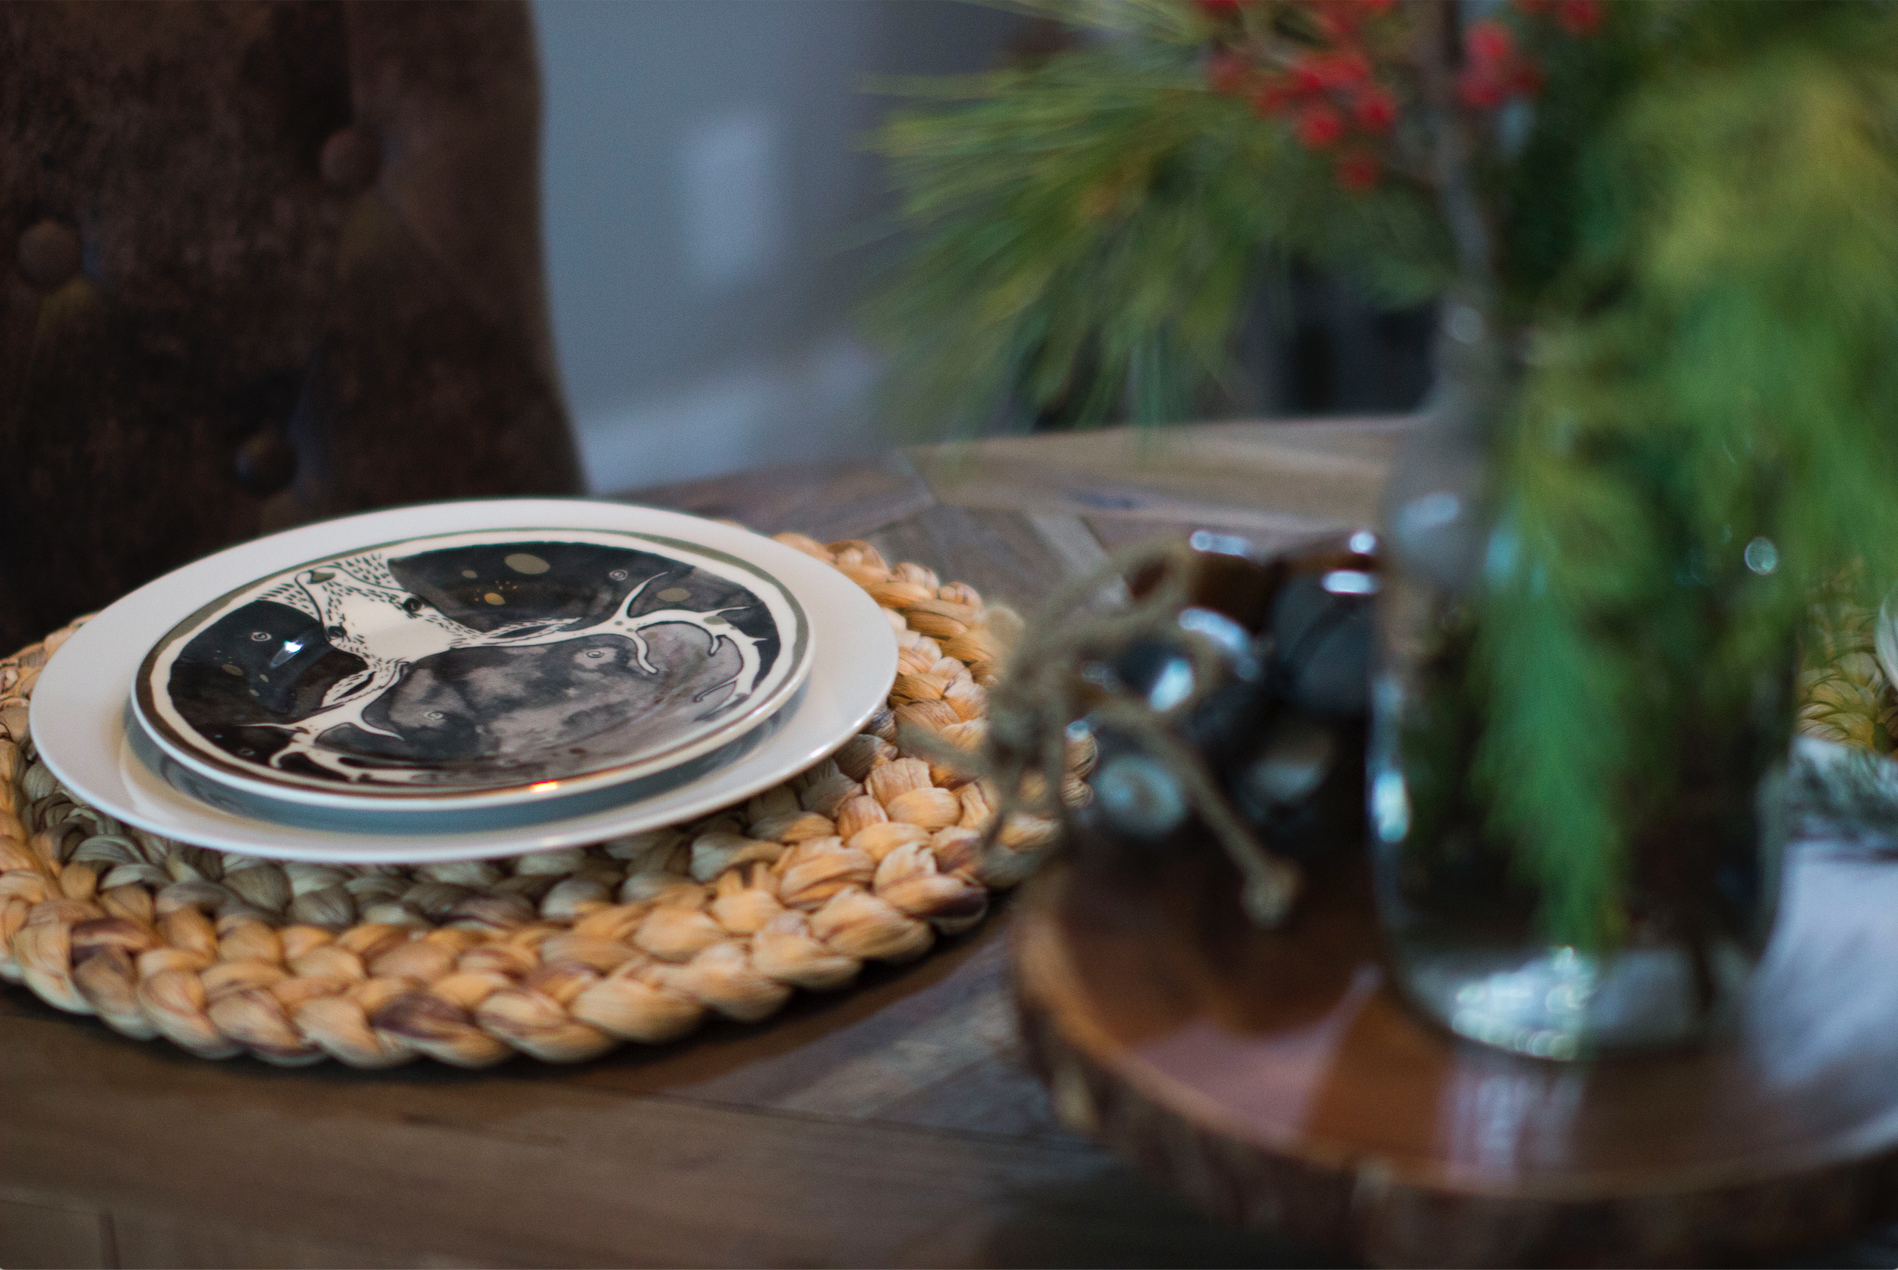 Whimsical holiday plates from Anthropologie